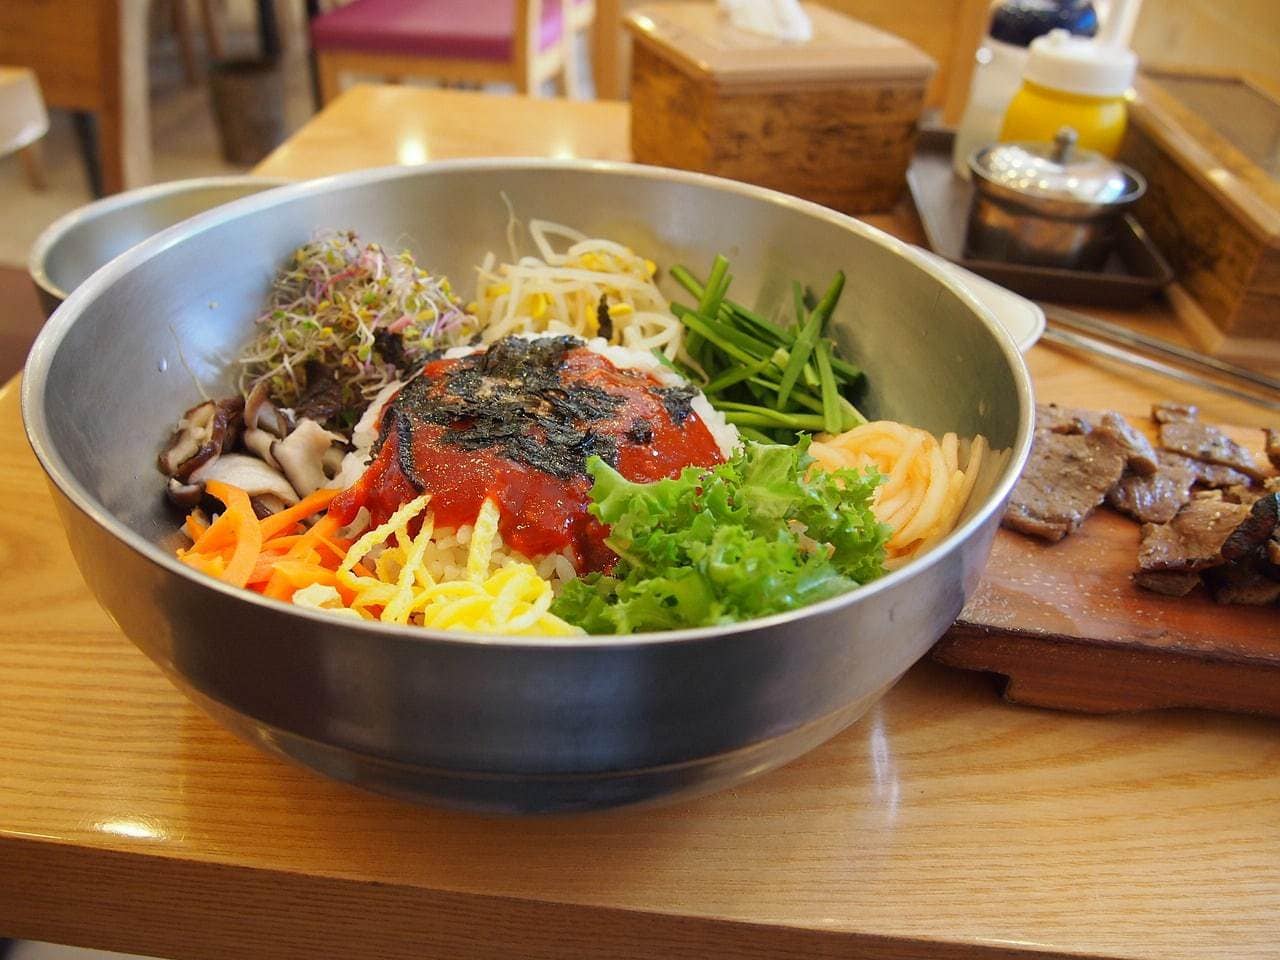 A Korean staple and must try, bibimbap or mix rice